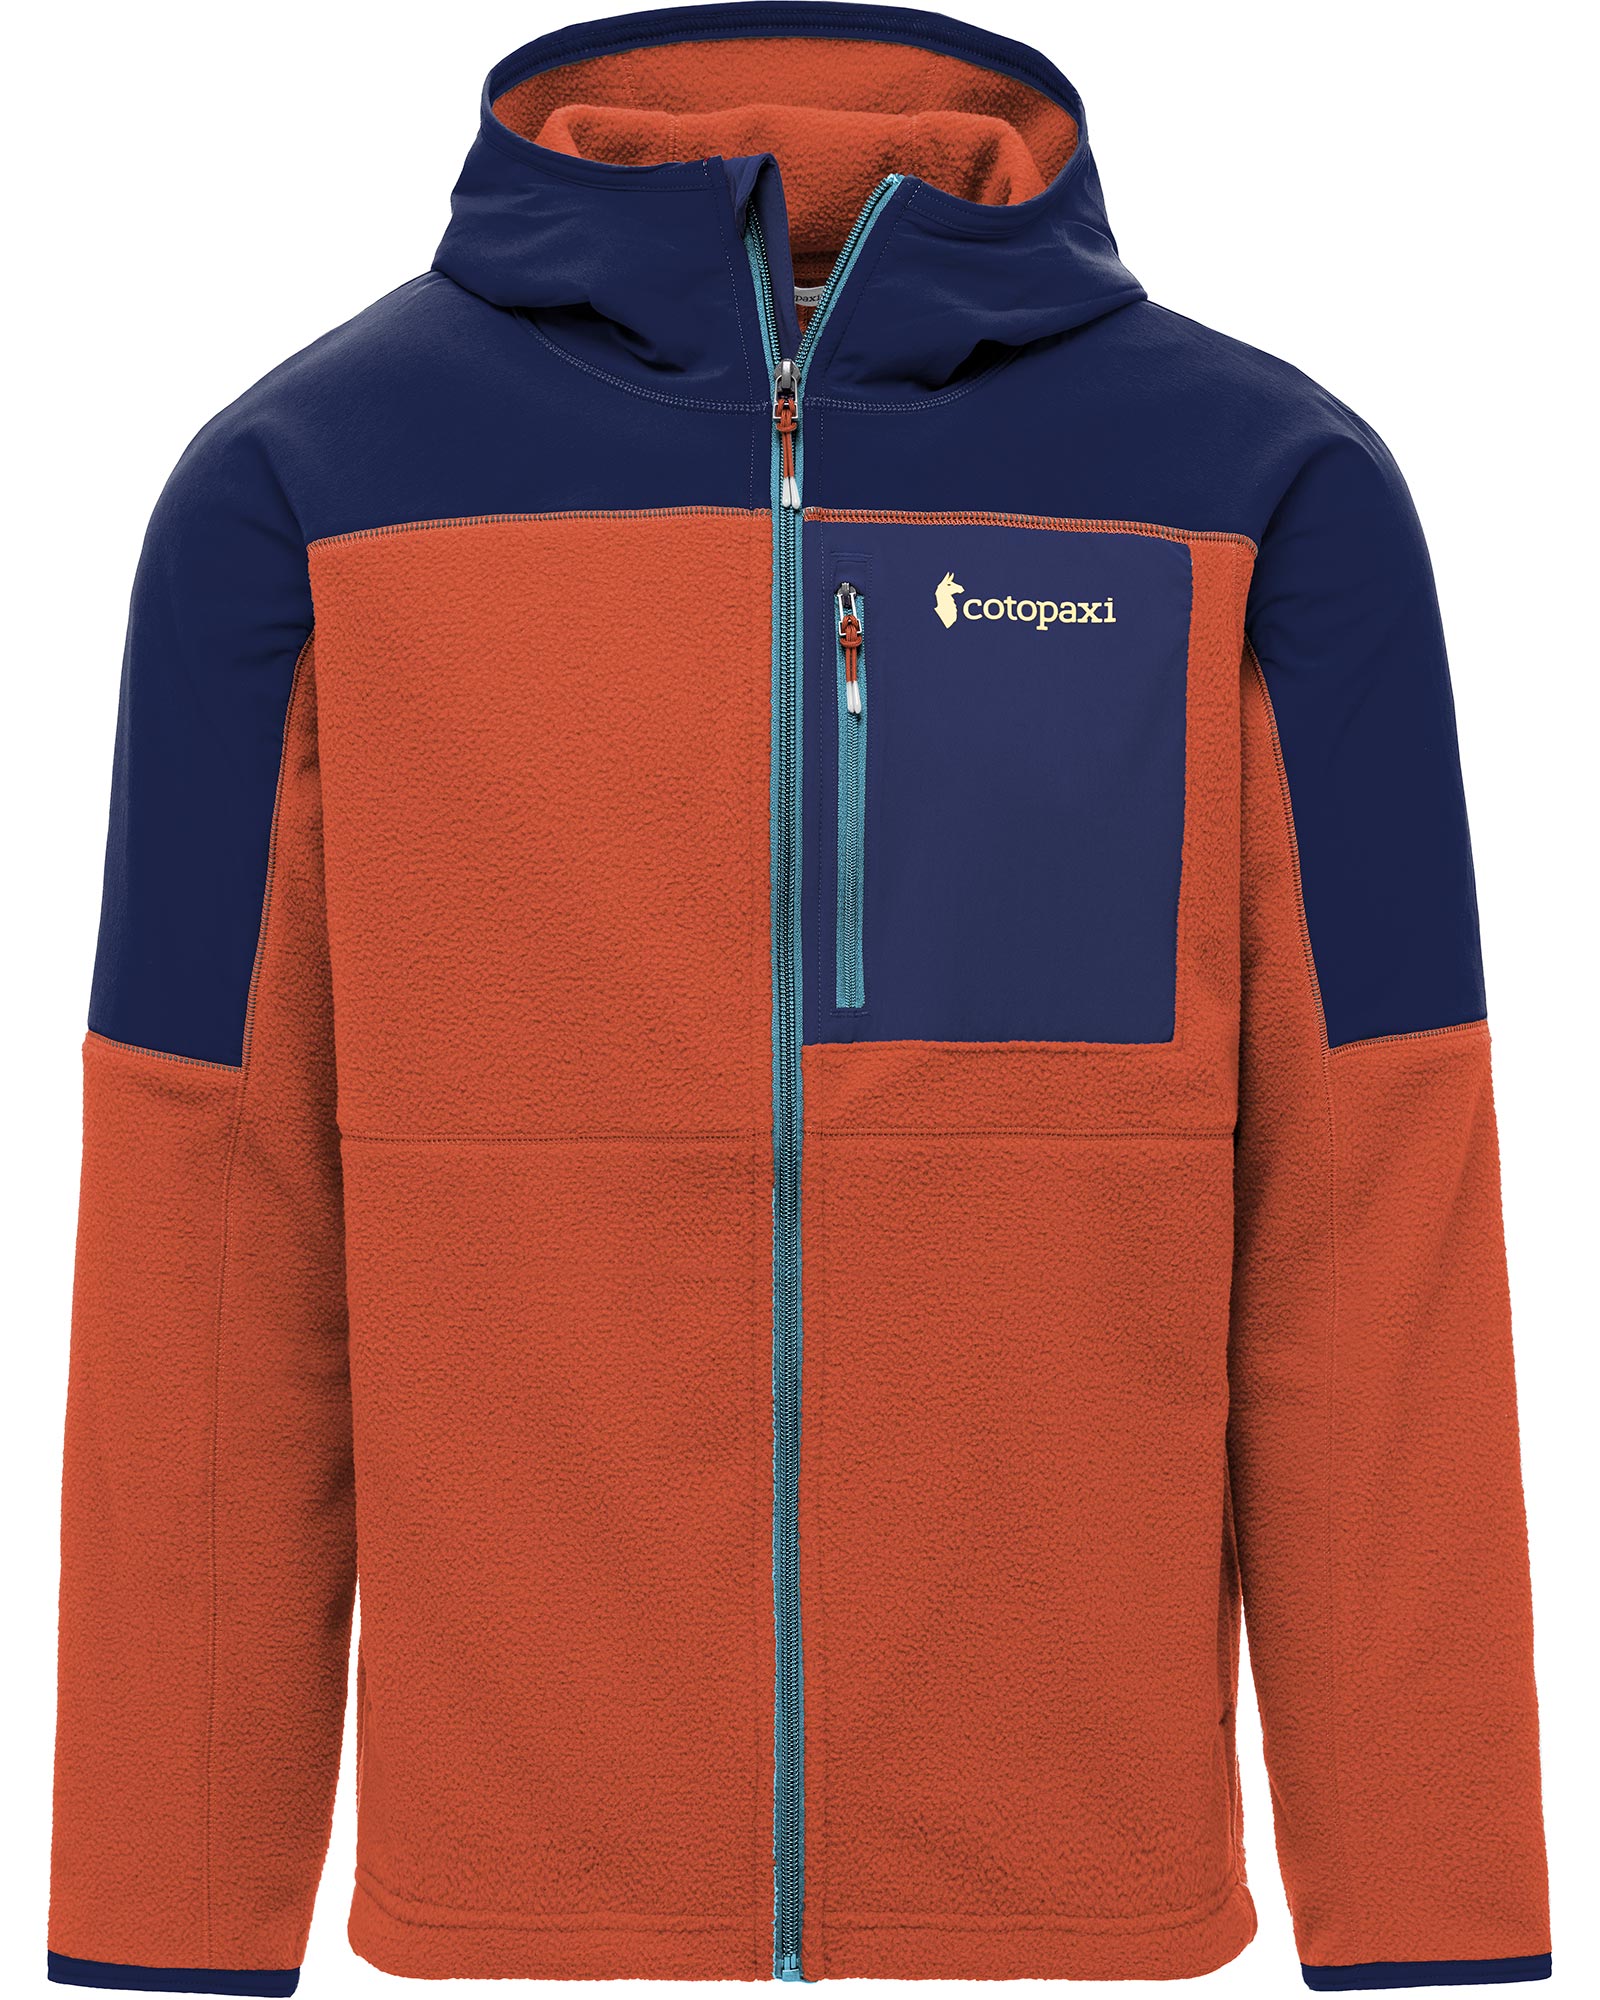 Cotopaxi Abrazo Men’s Full Zip Hooded Jacket - Maritime/Spice L